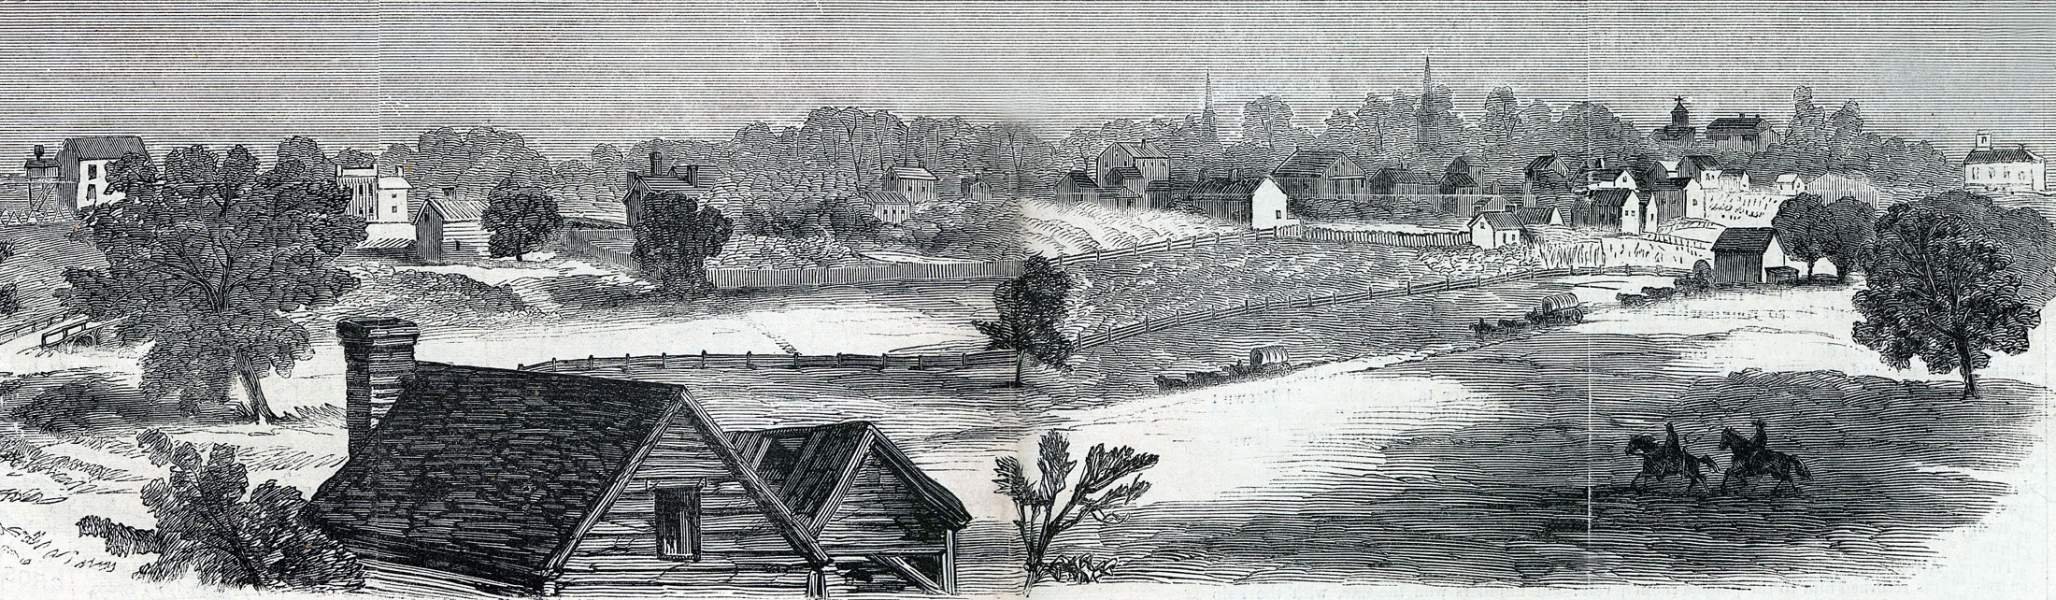 Culpeper, Virginia, September 1863, artist's impression, zoomable image